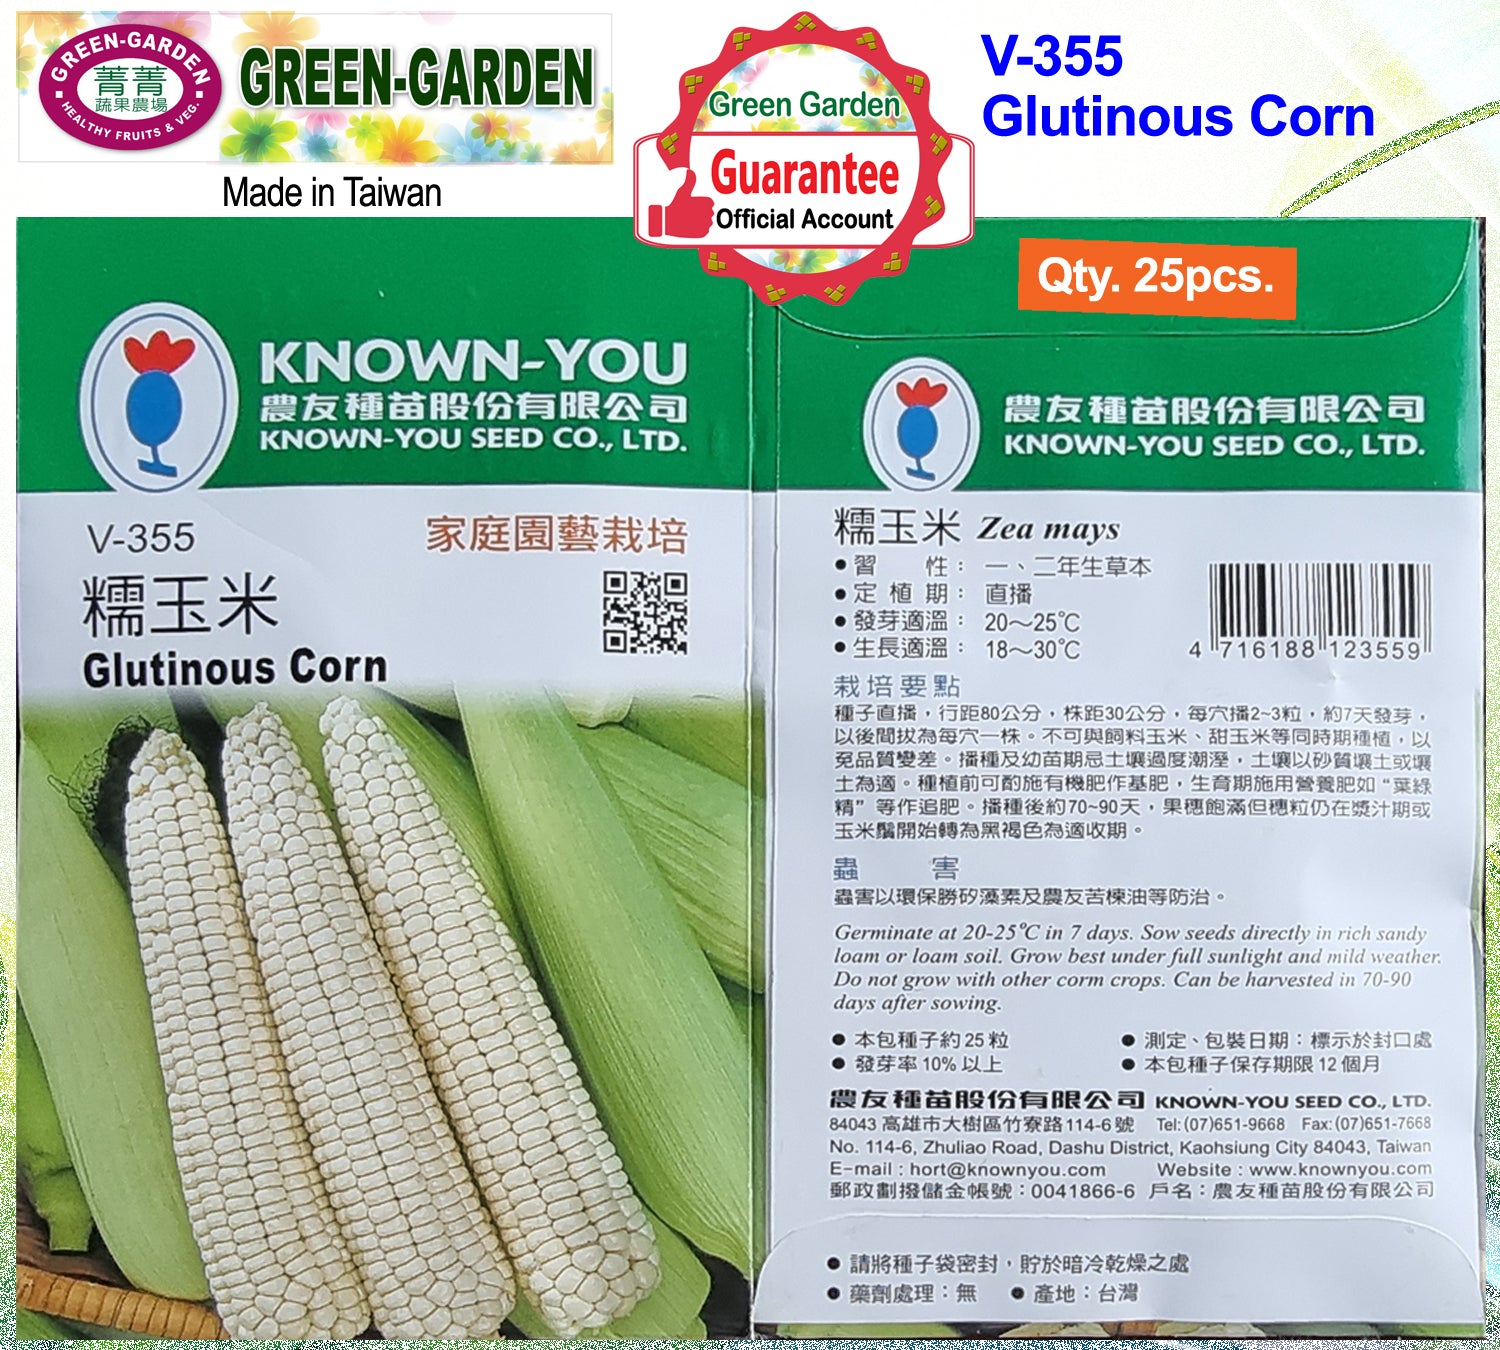 Known You Vegetable Seeds (V-355 Glutinous Corn)